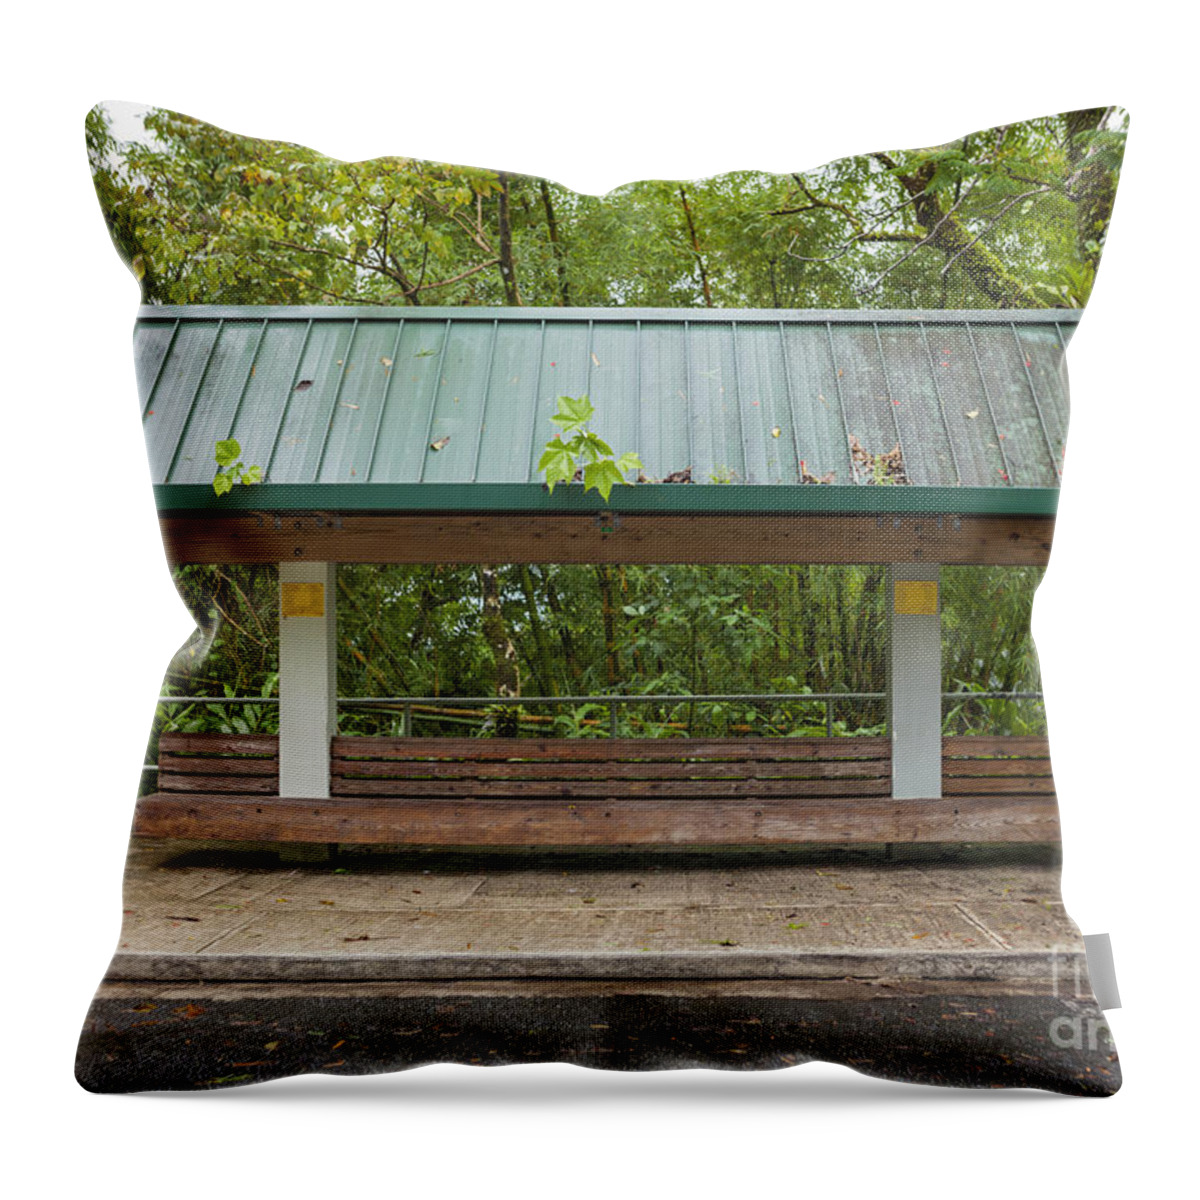 El Yunque Throw Pillow featuring the photograph Bus Stop Bench In The Rainforest by Bryan Mullennix